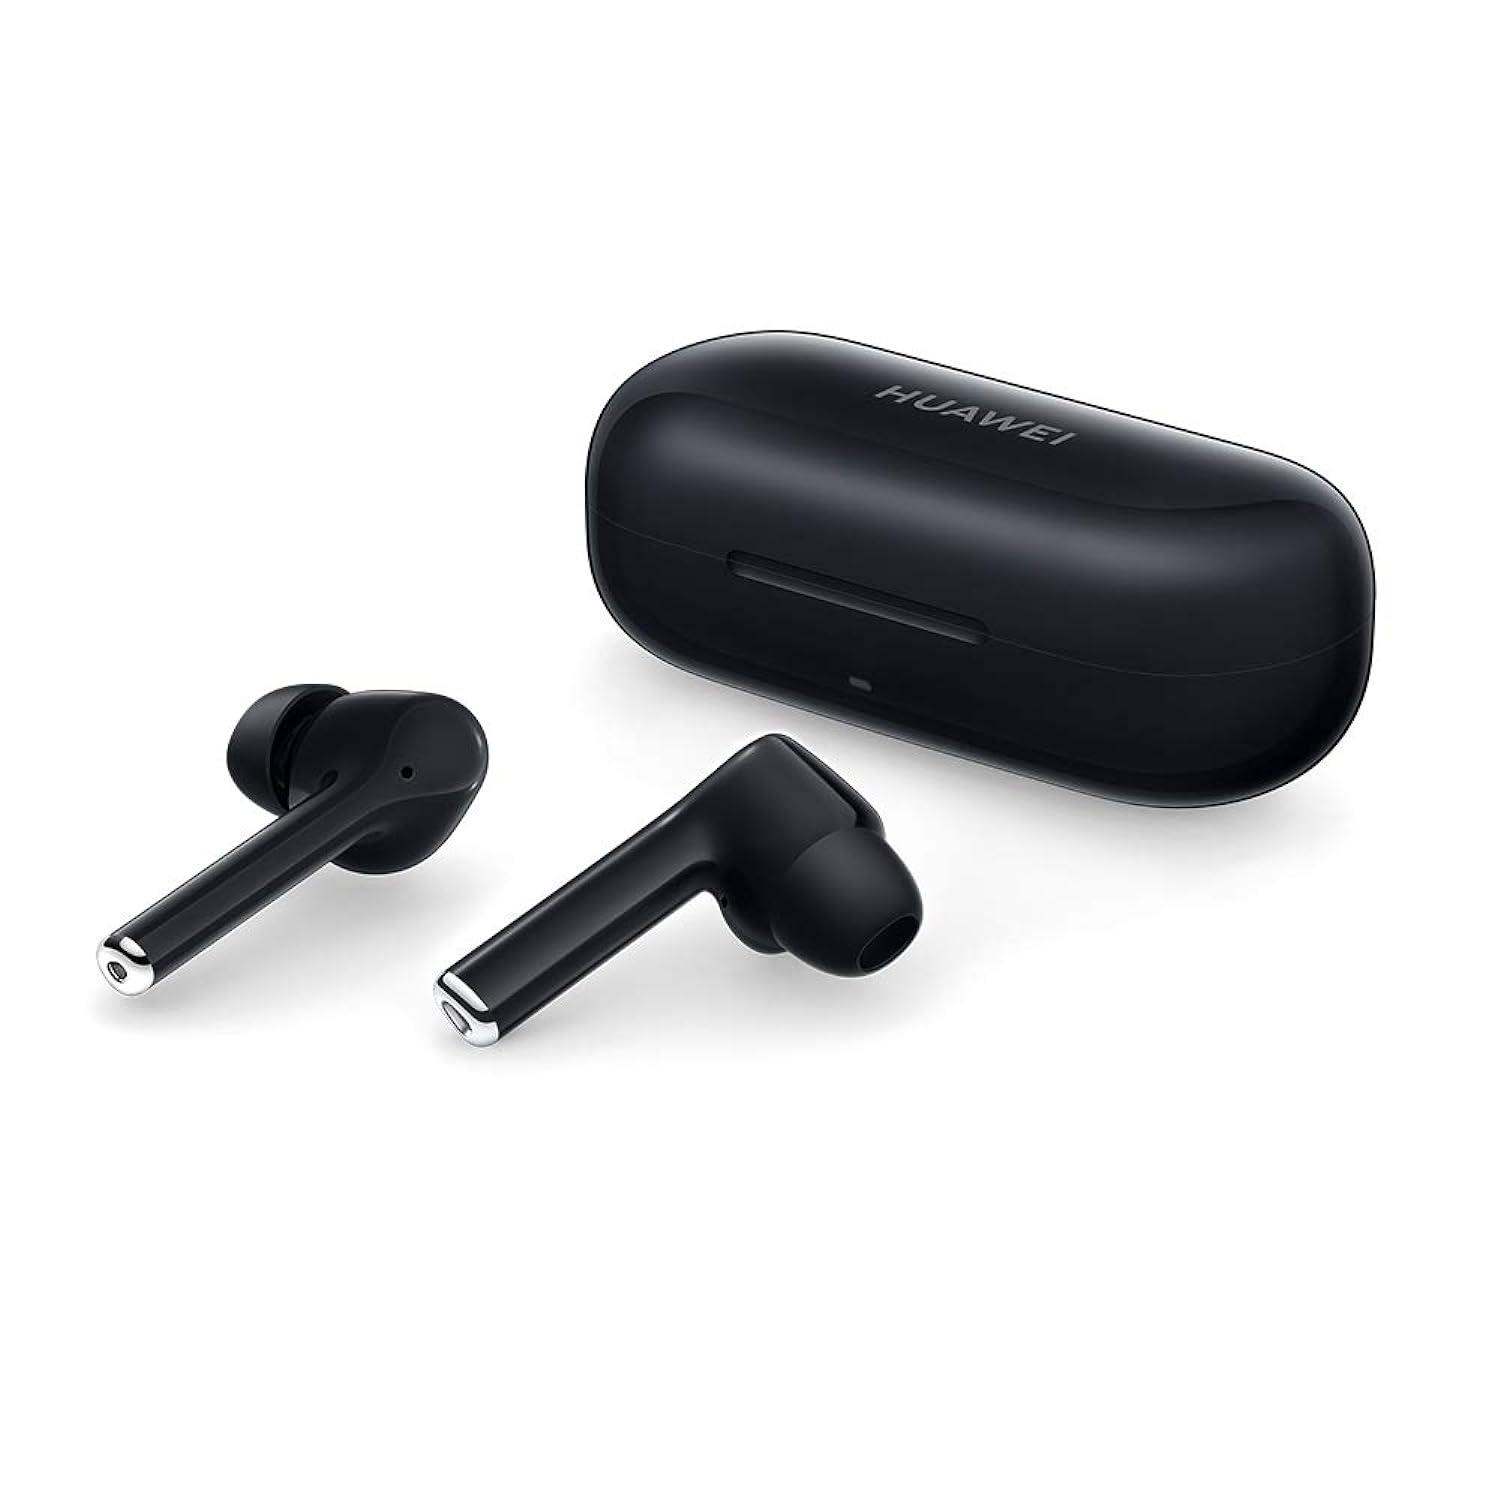 huawei freebuds 3i - wireless earbuds with ultimate active noise cancellation (3-mic system earphones, fast bluetooth connect